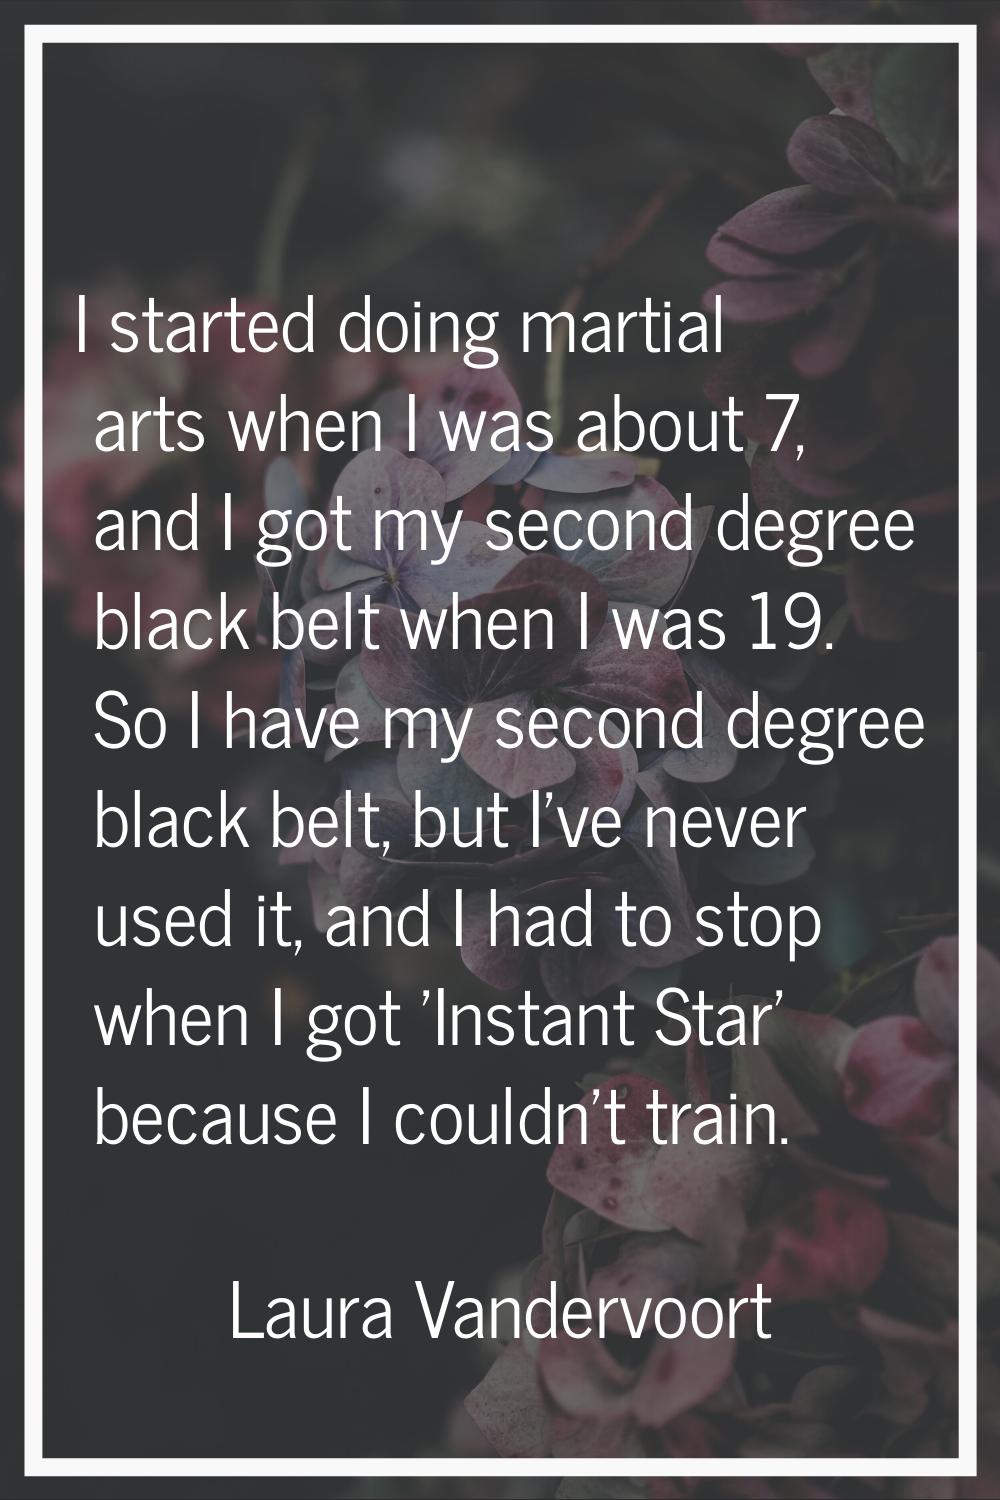 I started doing martial arts when I was about 7, and I got my second degree black belt when I was 1